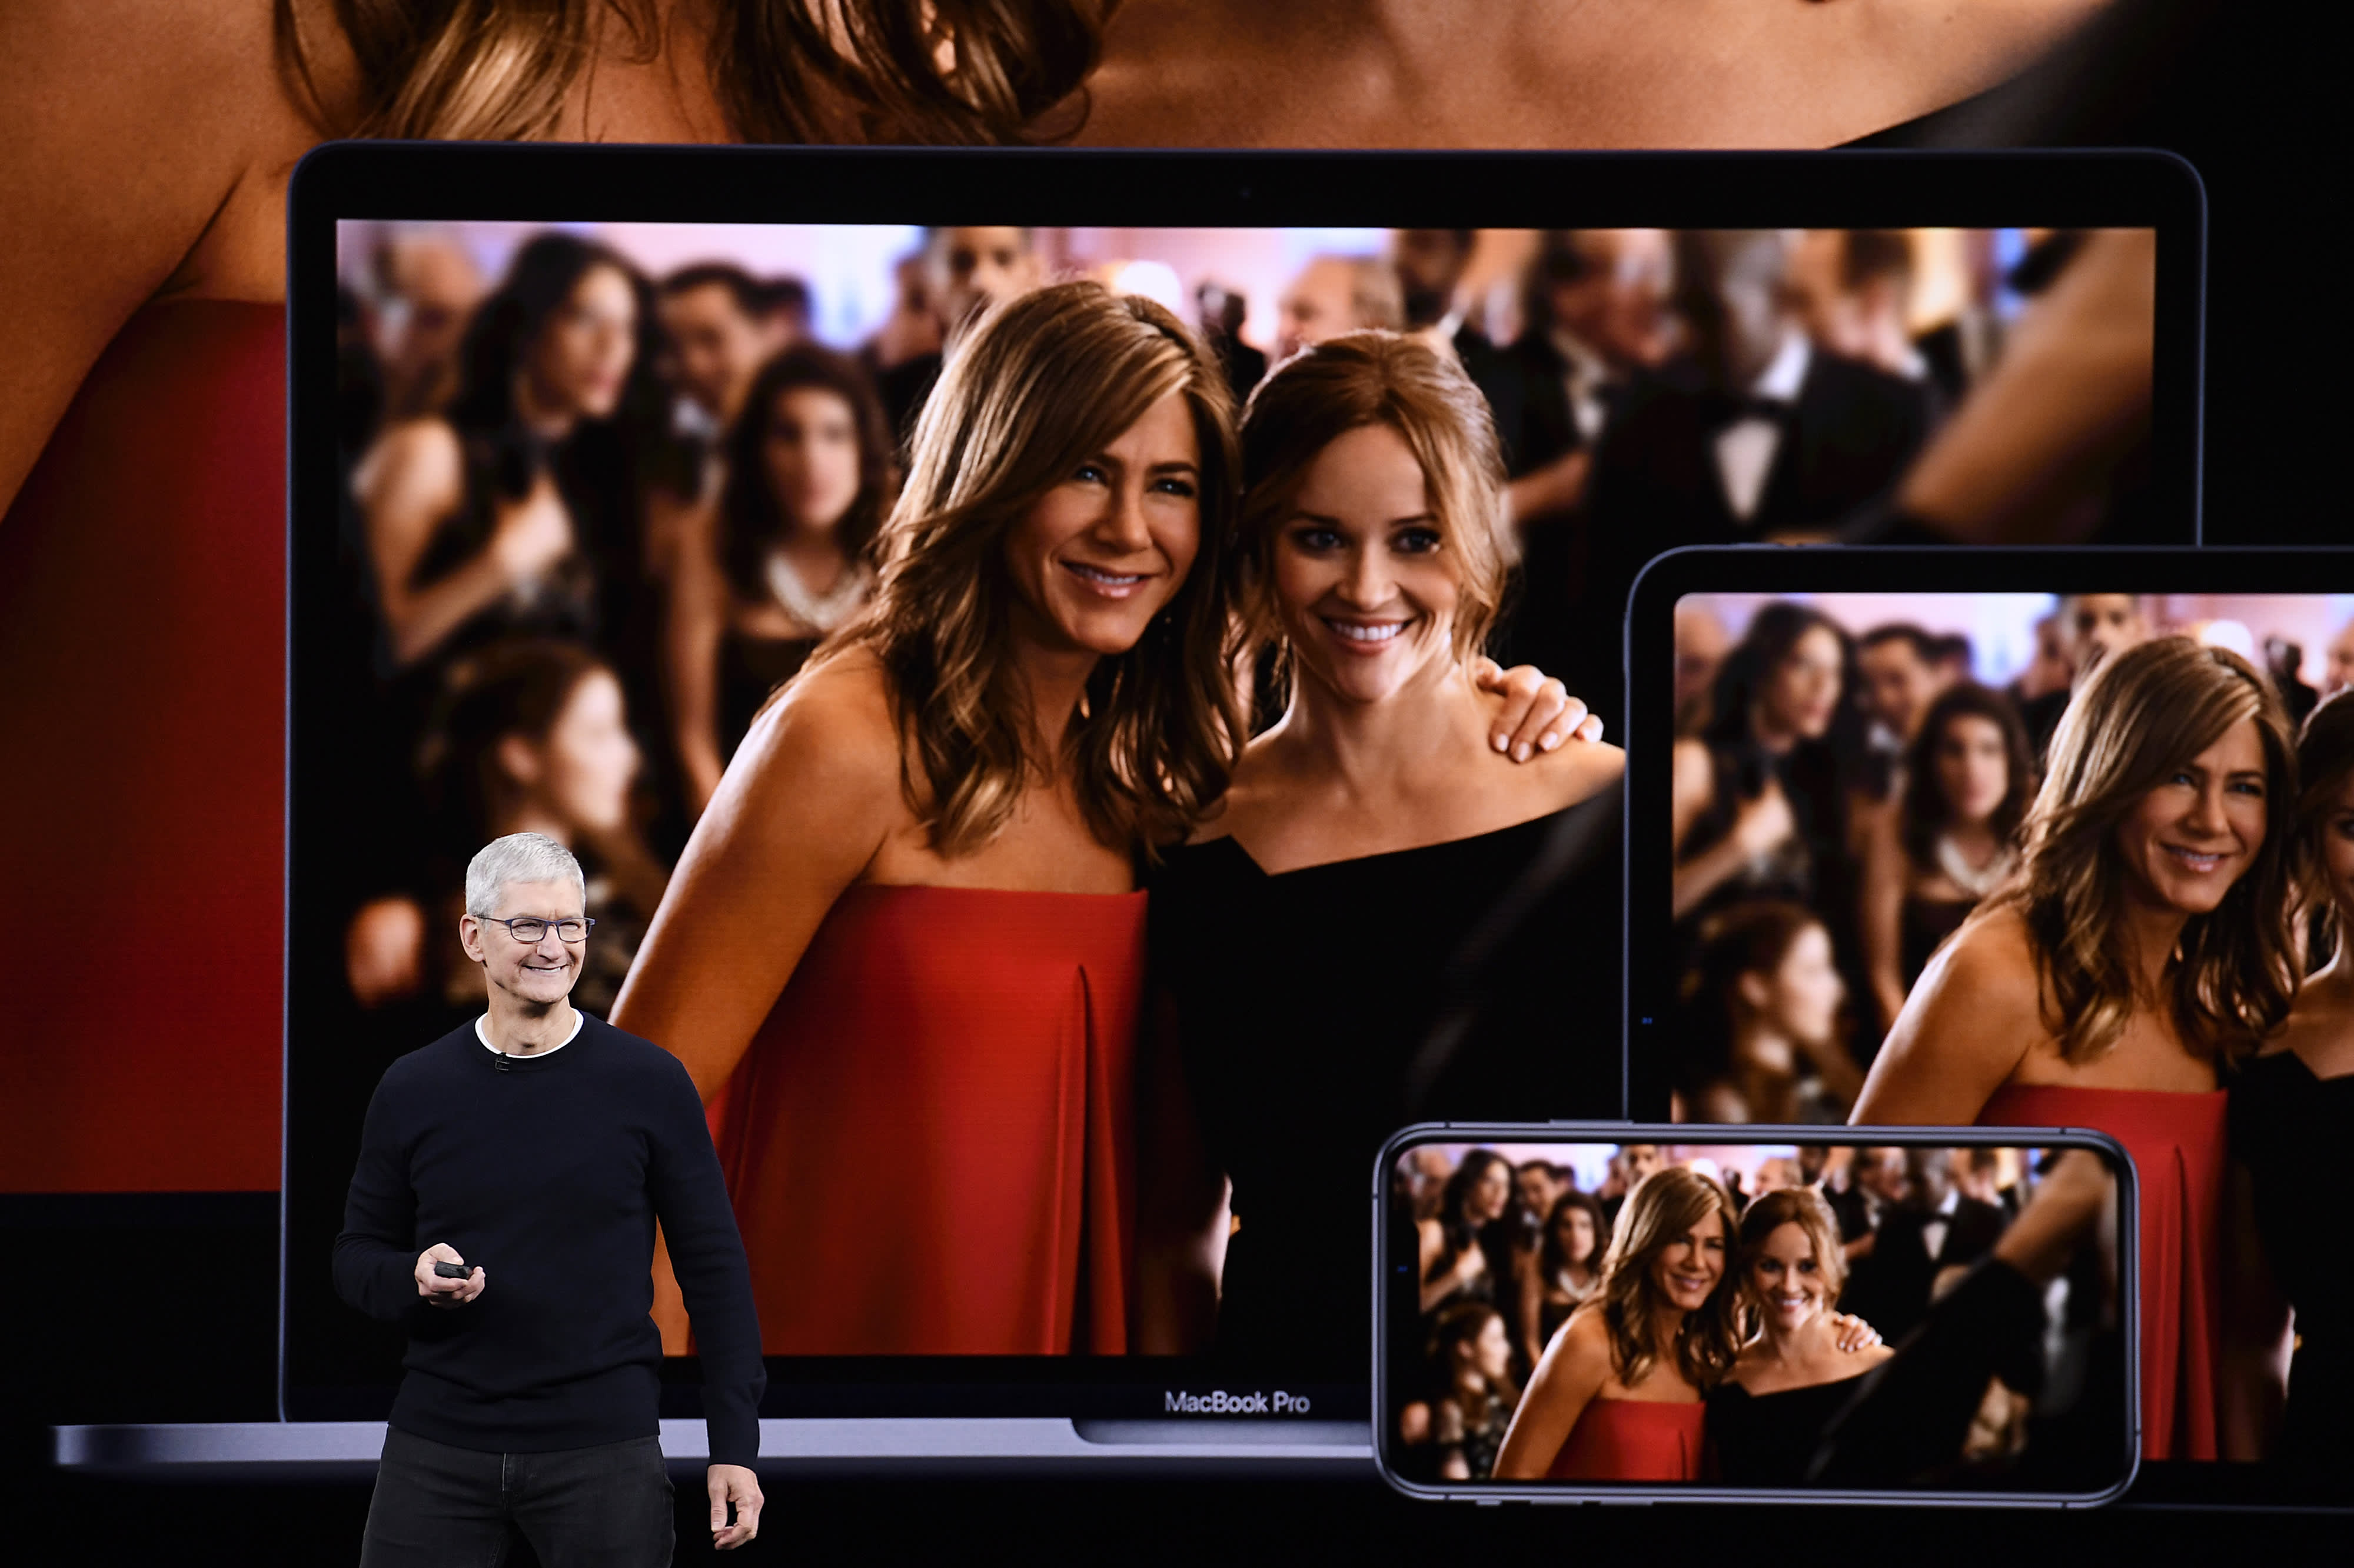 Apple claimed it had less than 20 million TV+ subscribers in July, showbiz union says